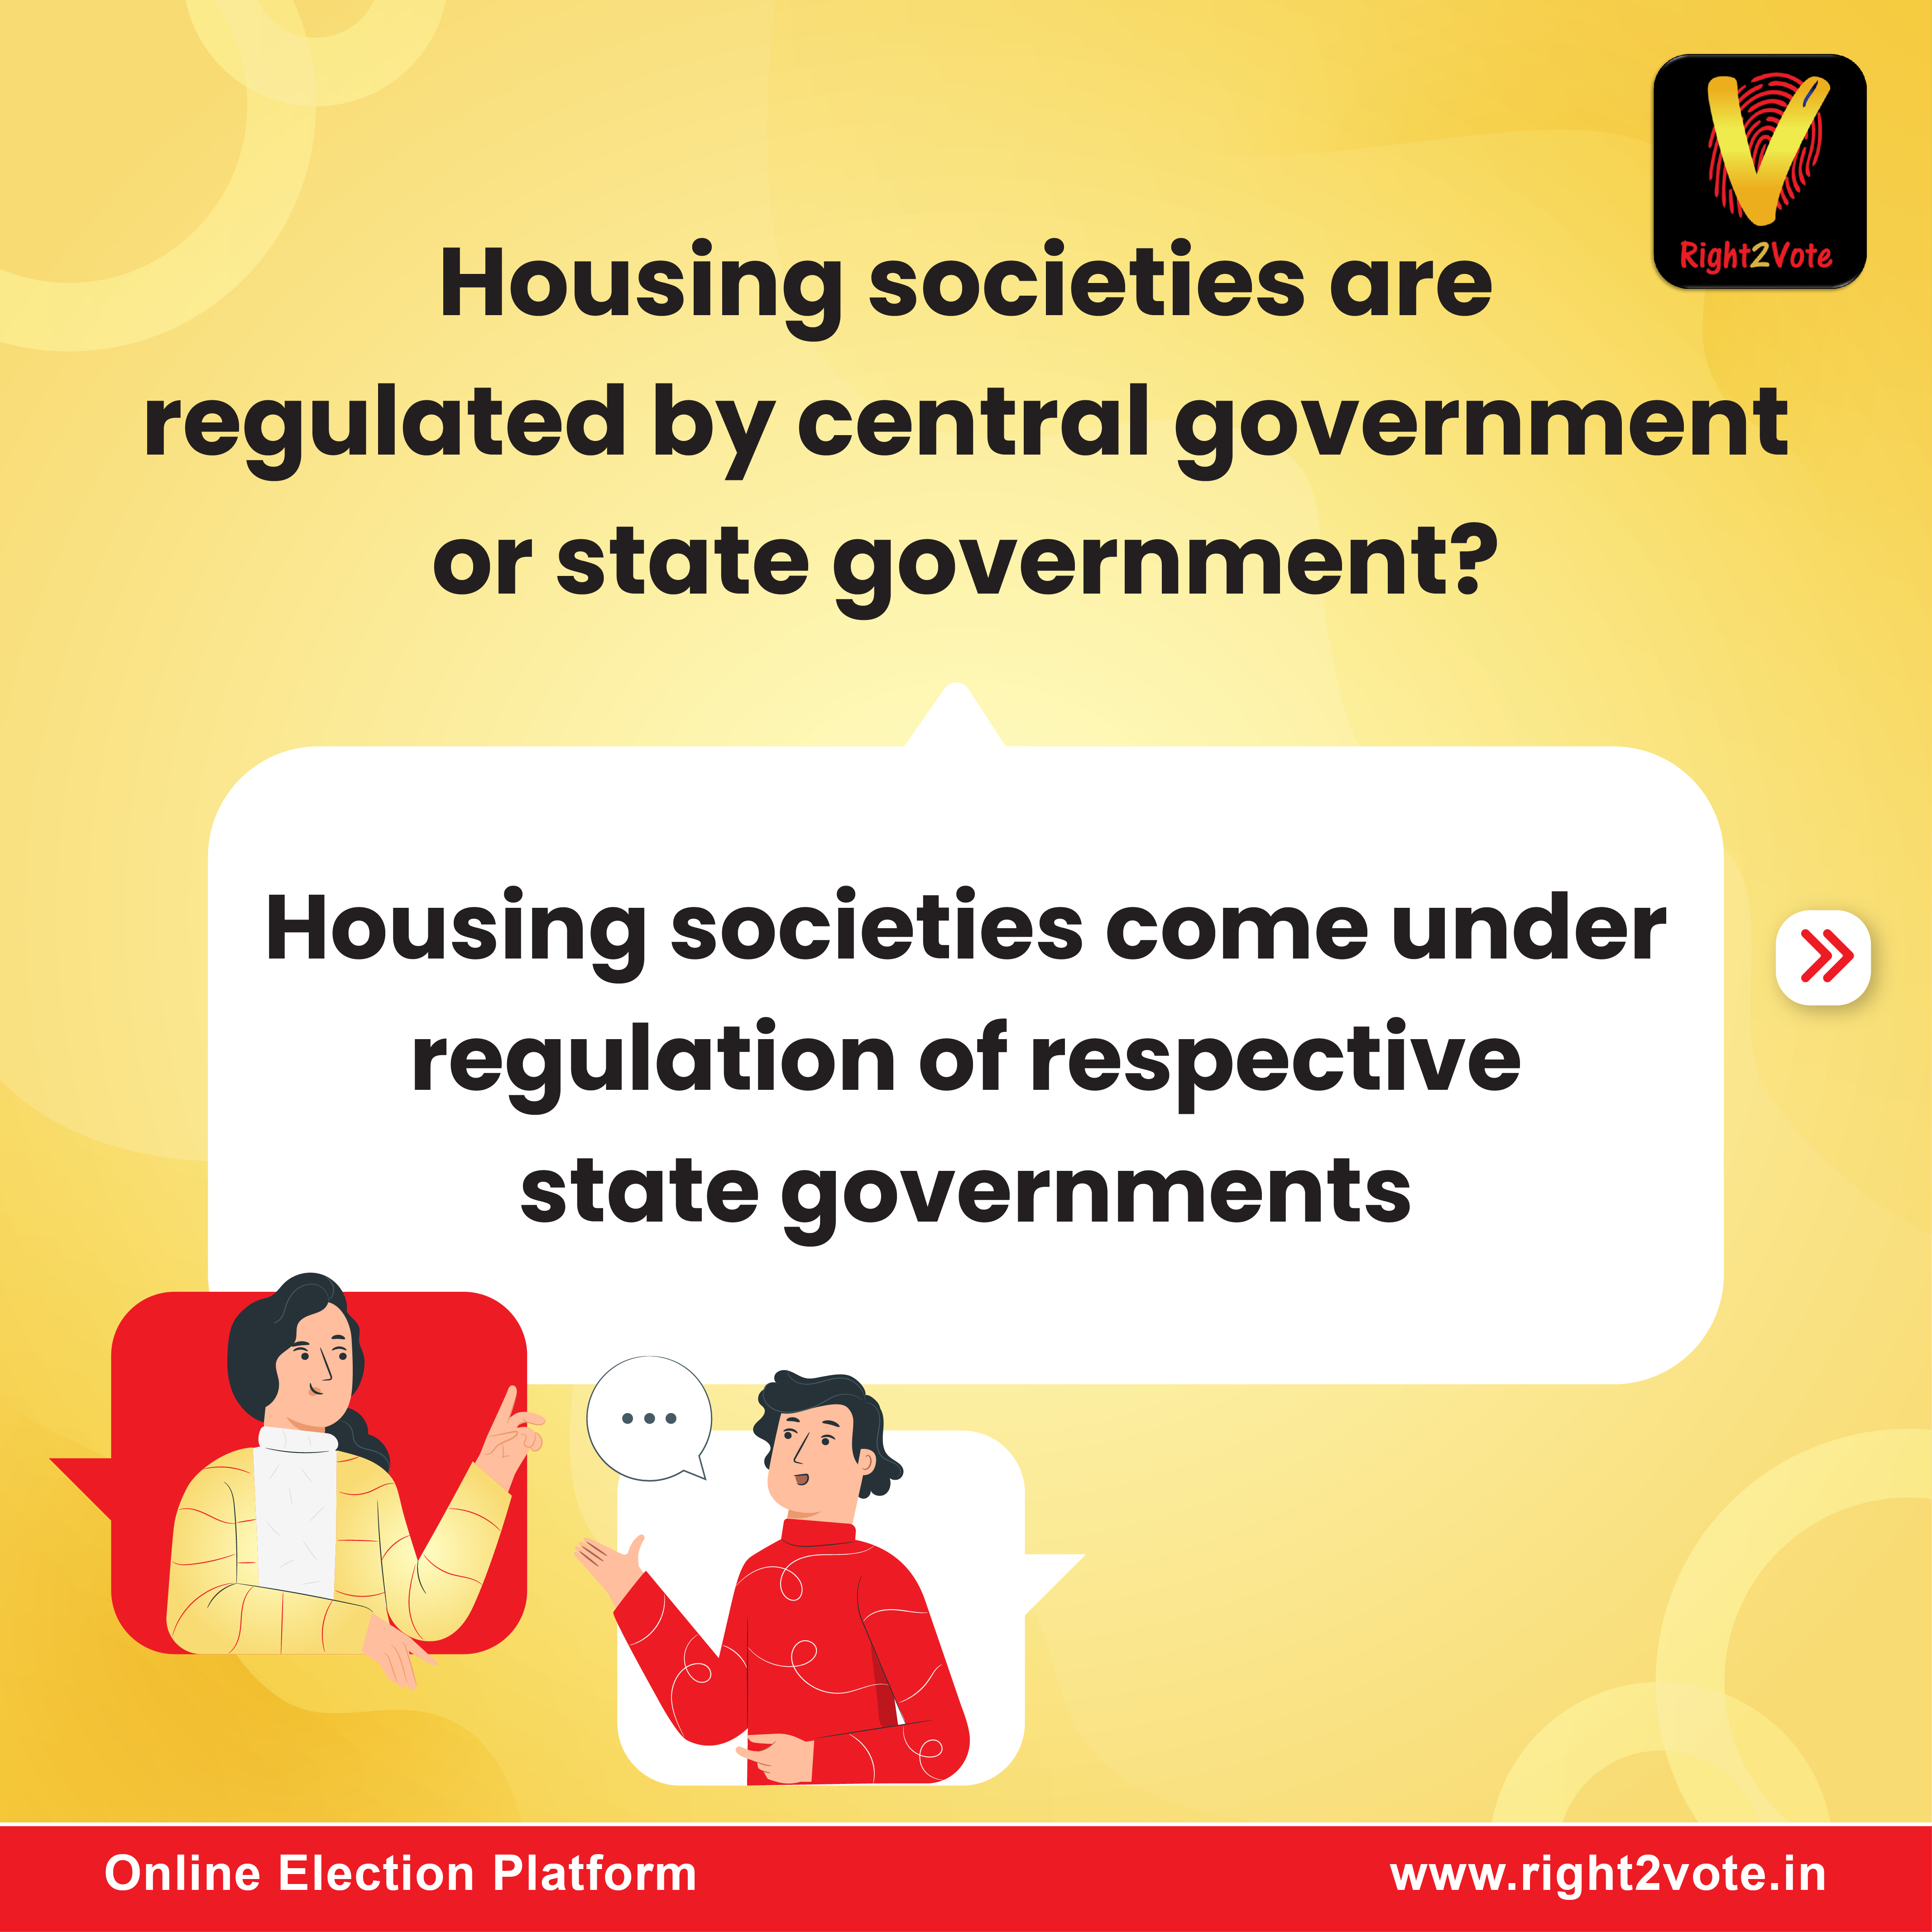 Regulation_of_houseing_socities - Right2Vote